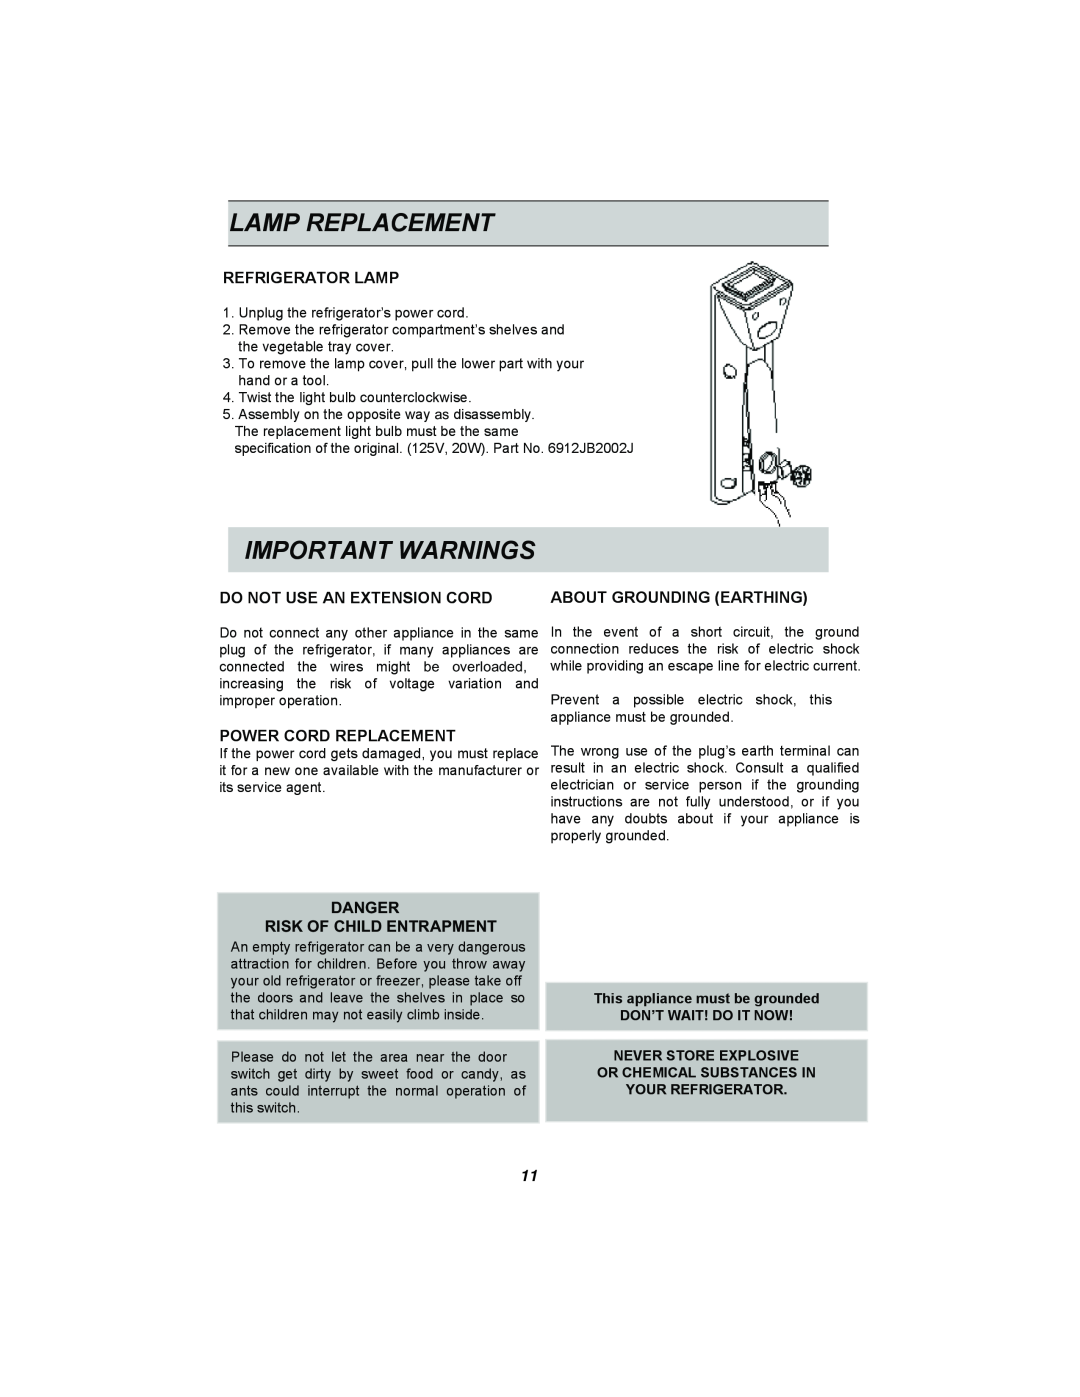 LG Electronics GR-382R manual Lamp Replacement, Important Warnings, Refrigerator Lamp, Do Not Use An Extension Cord 